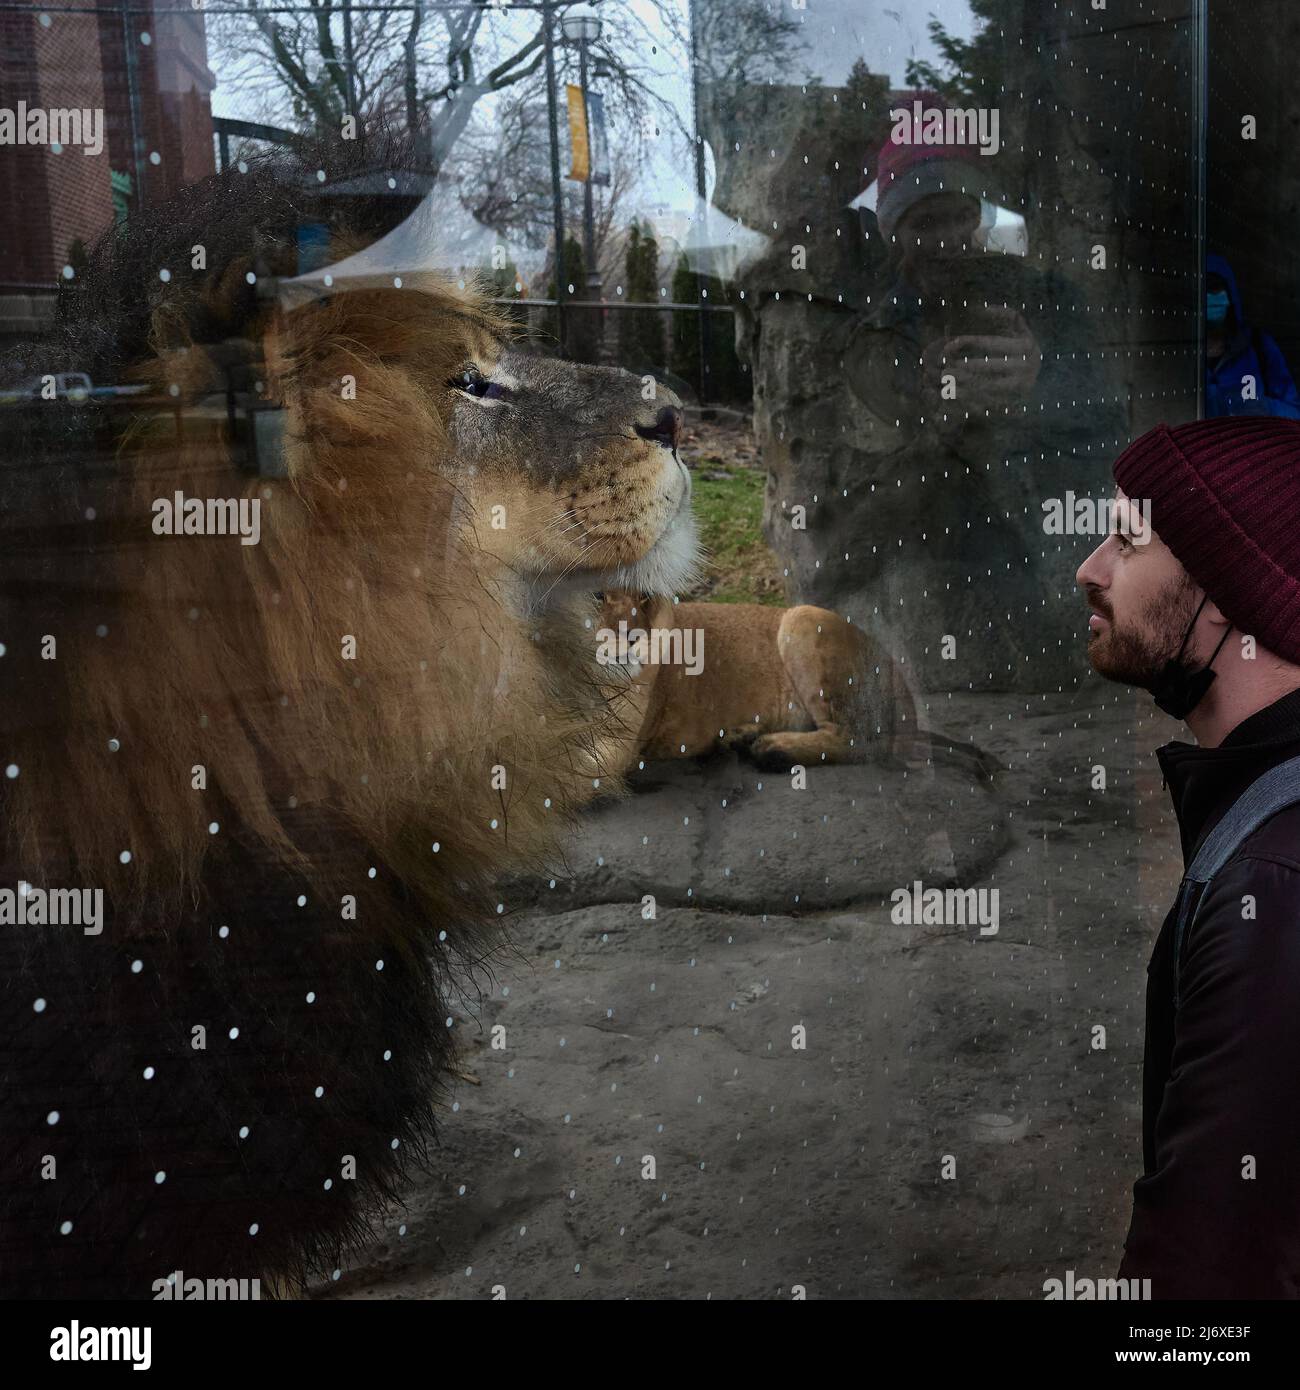 Lincoln Park visitor observing lion Stock Photo